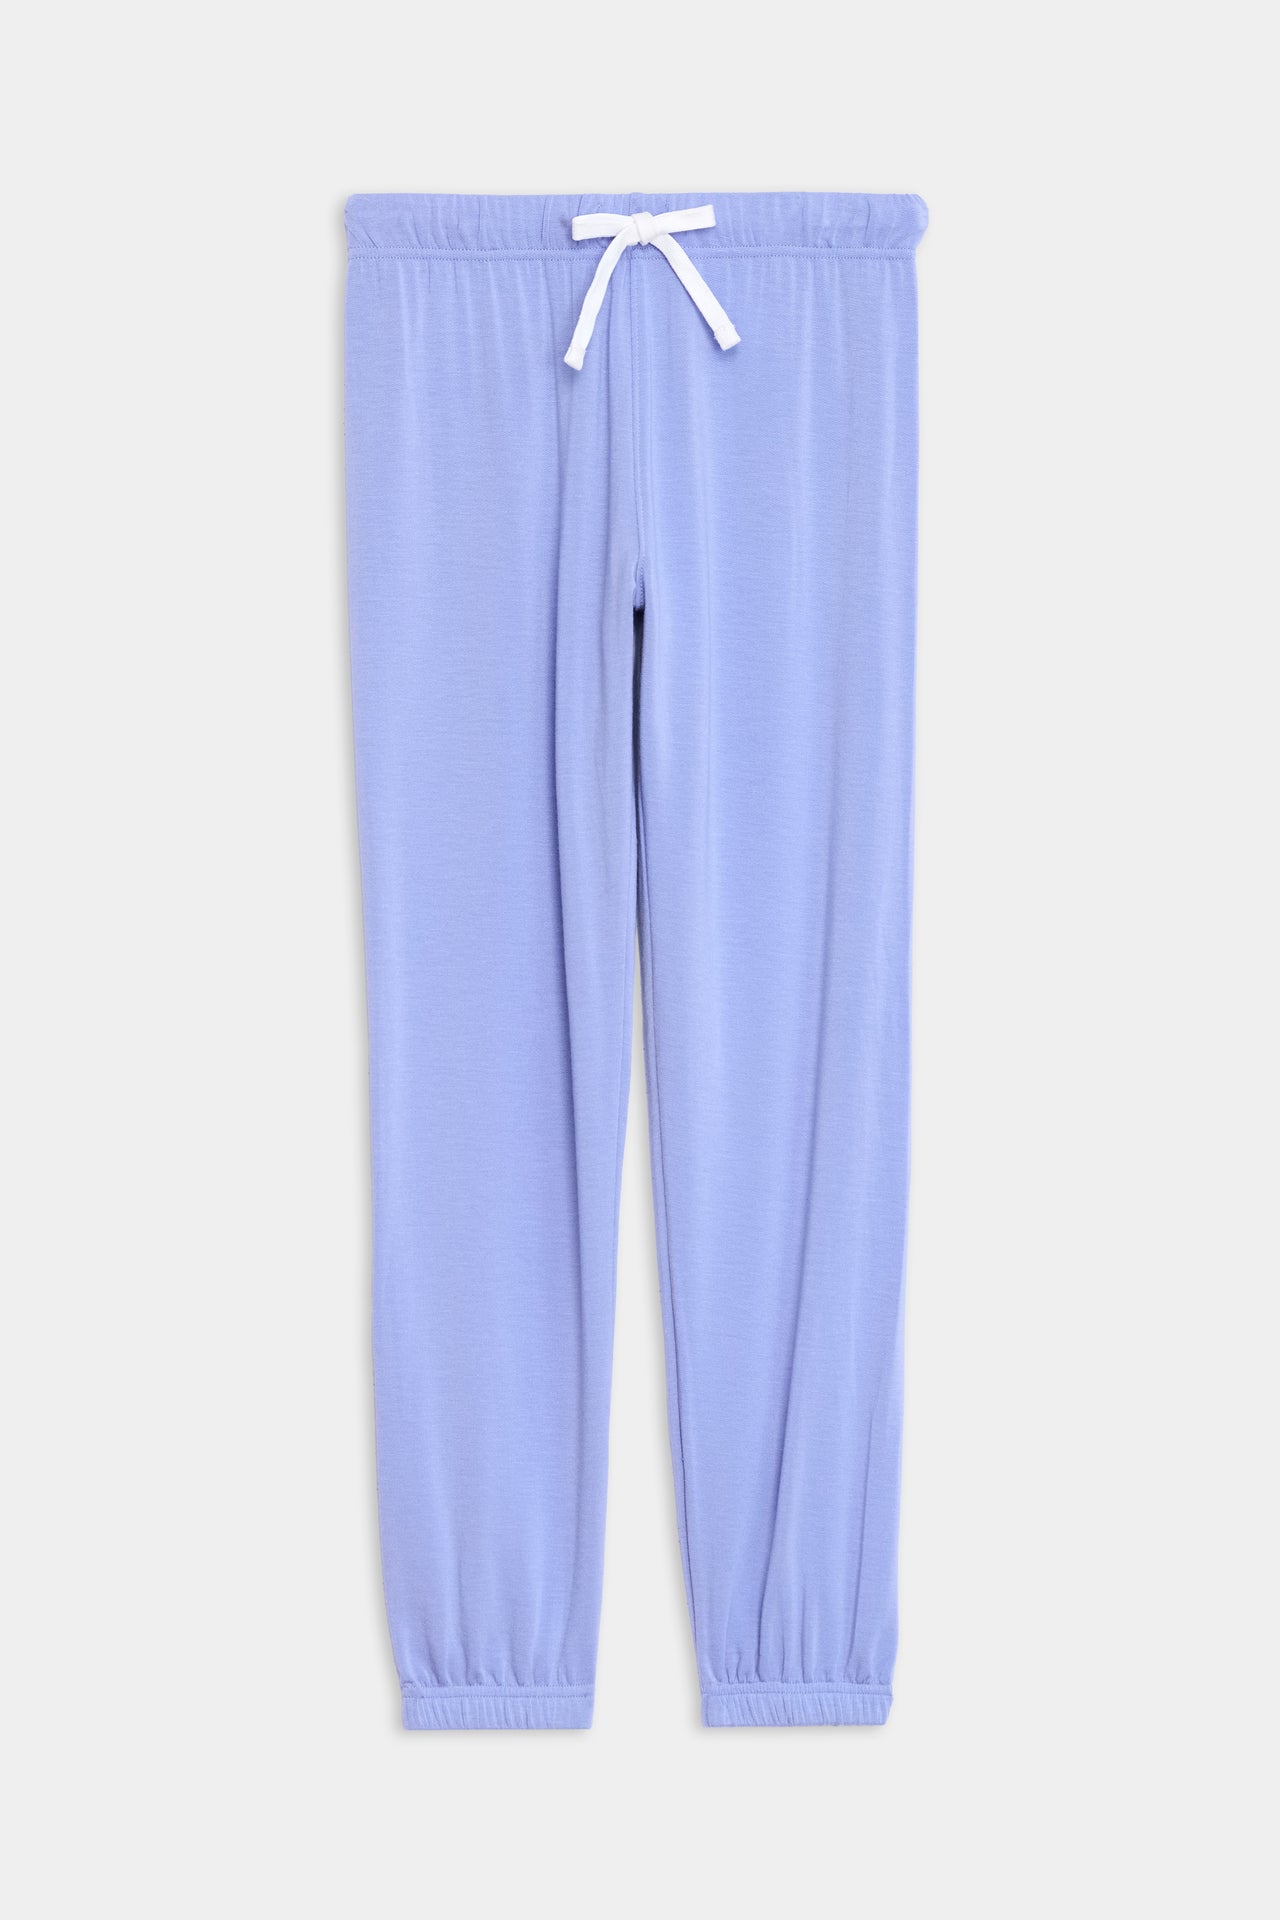 Front flat view of light purple sweatpant jogger with white drawstring